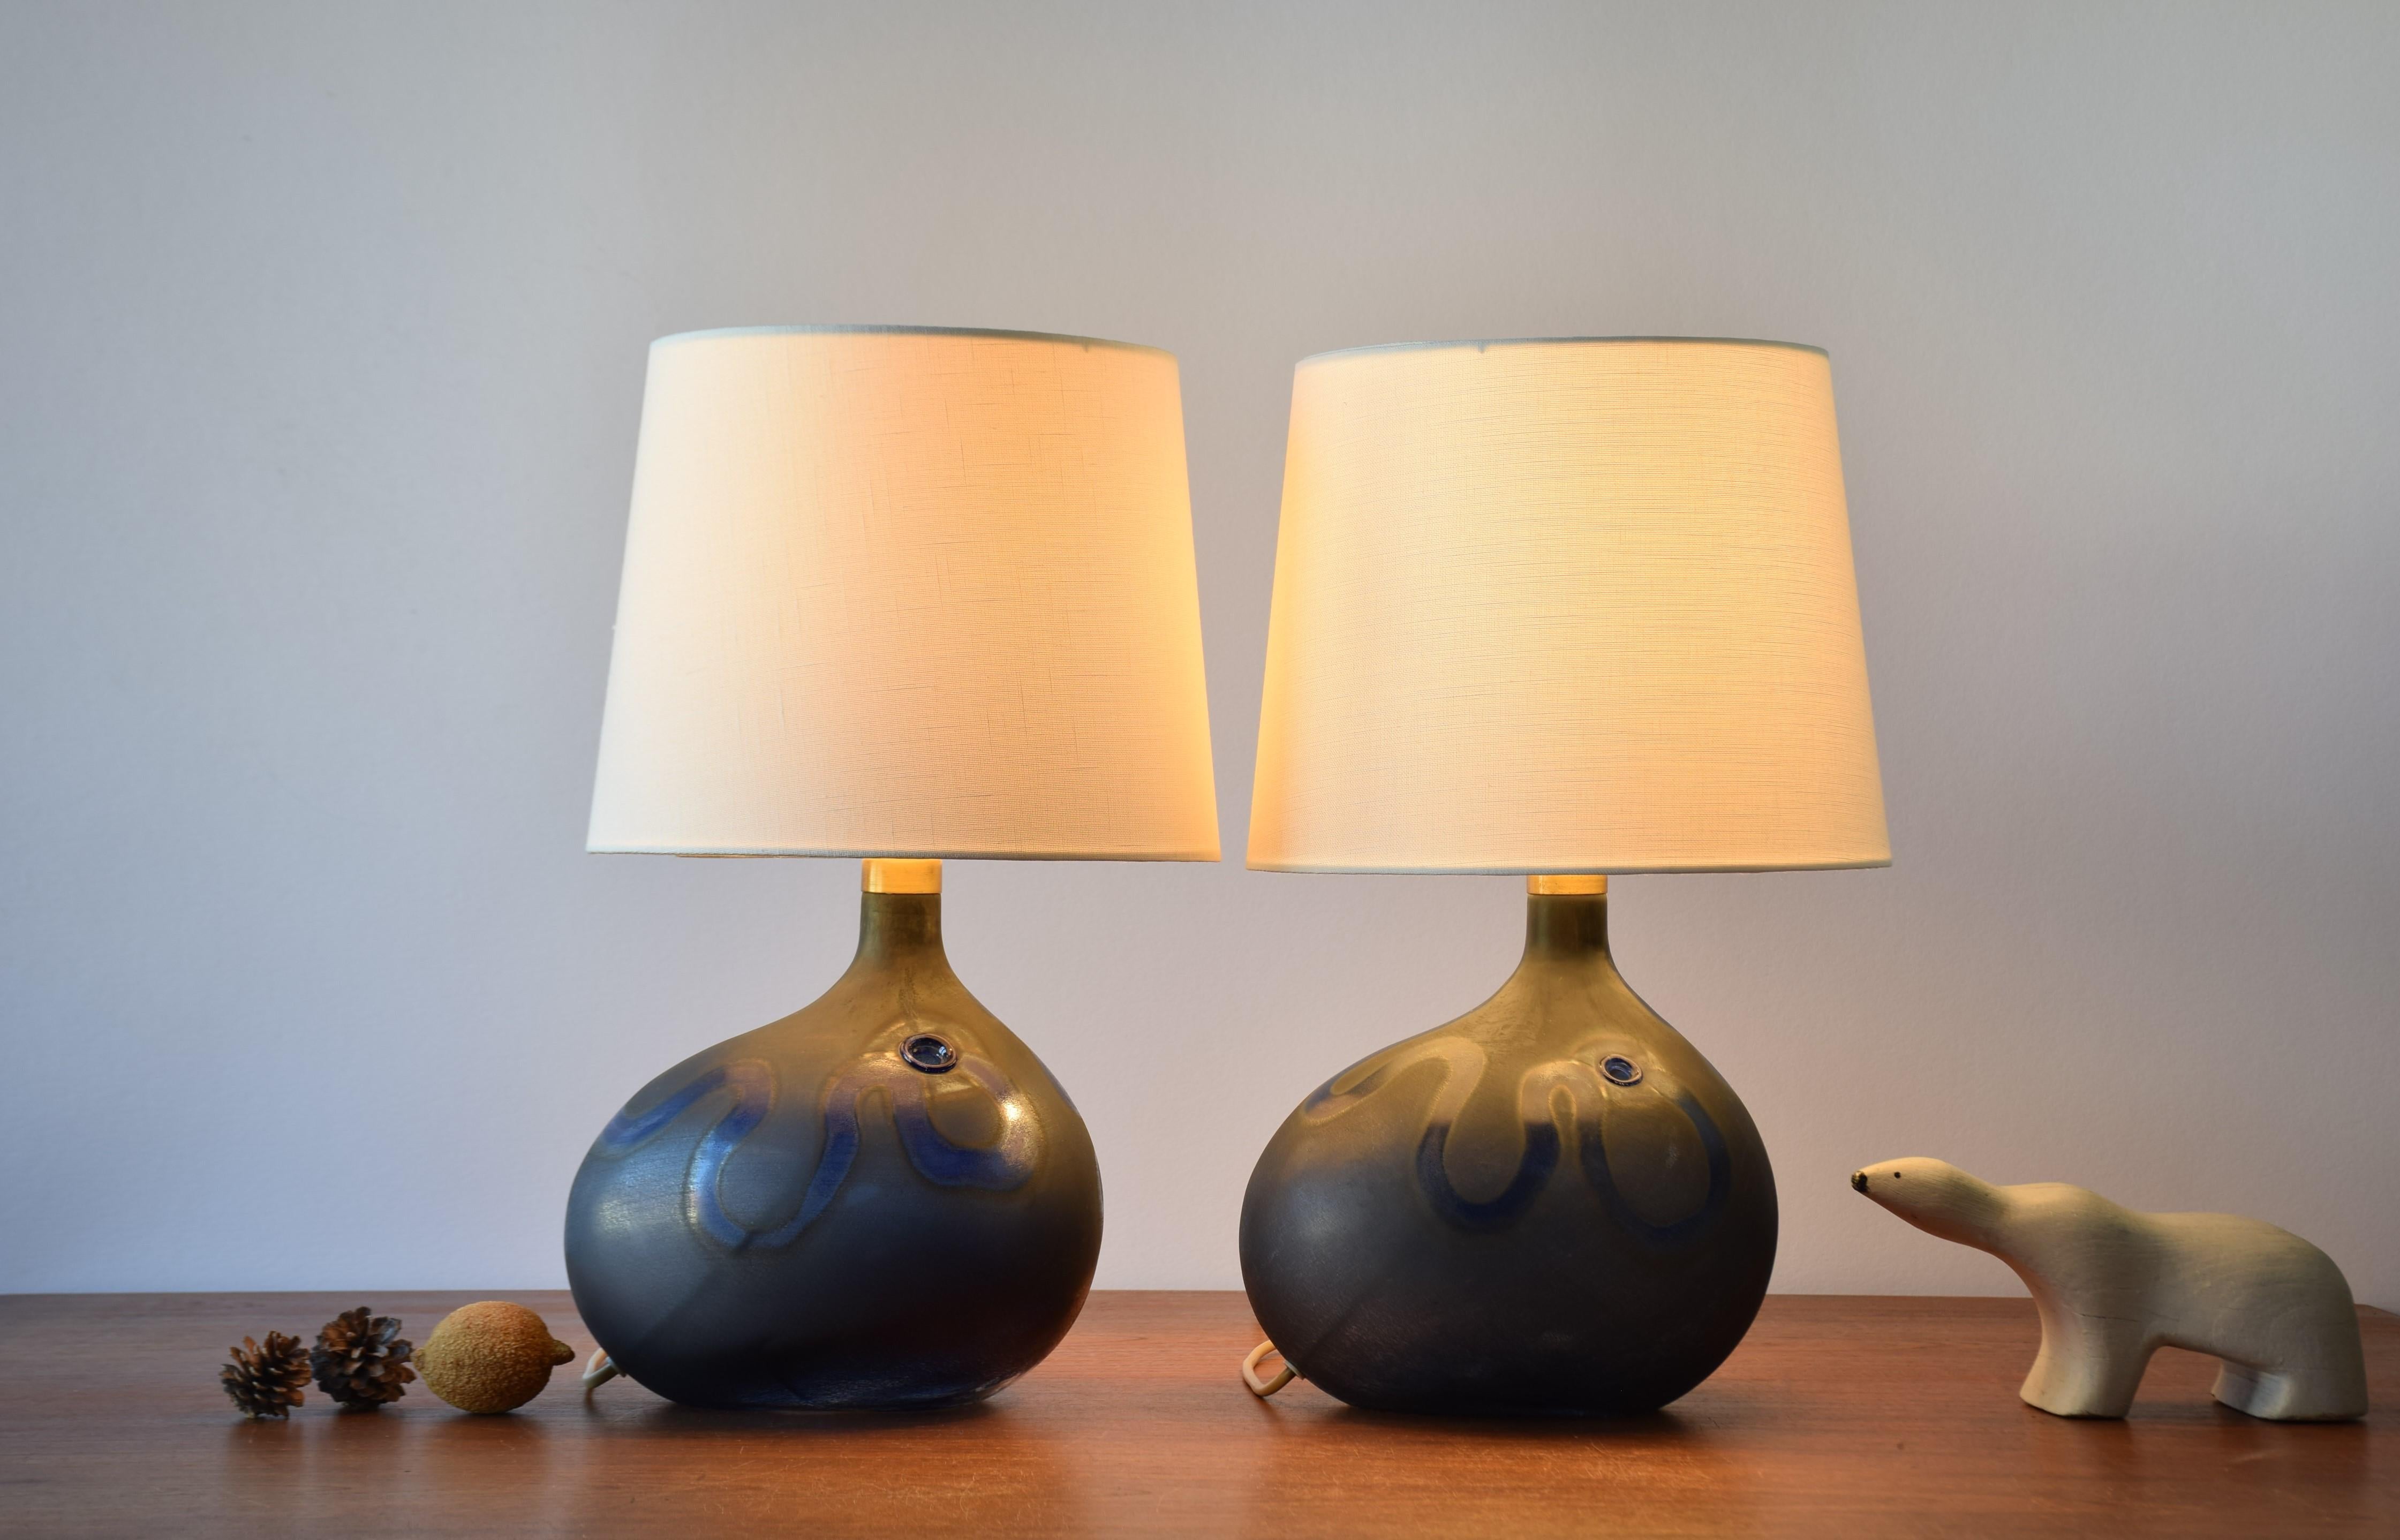 Pair of Danish midcentury sculptural hand blown glass lamps designed by Michael Bang and made by Holmegaard. They are from the series 